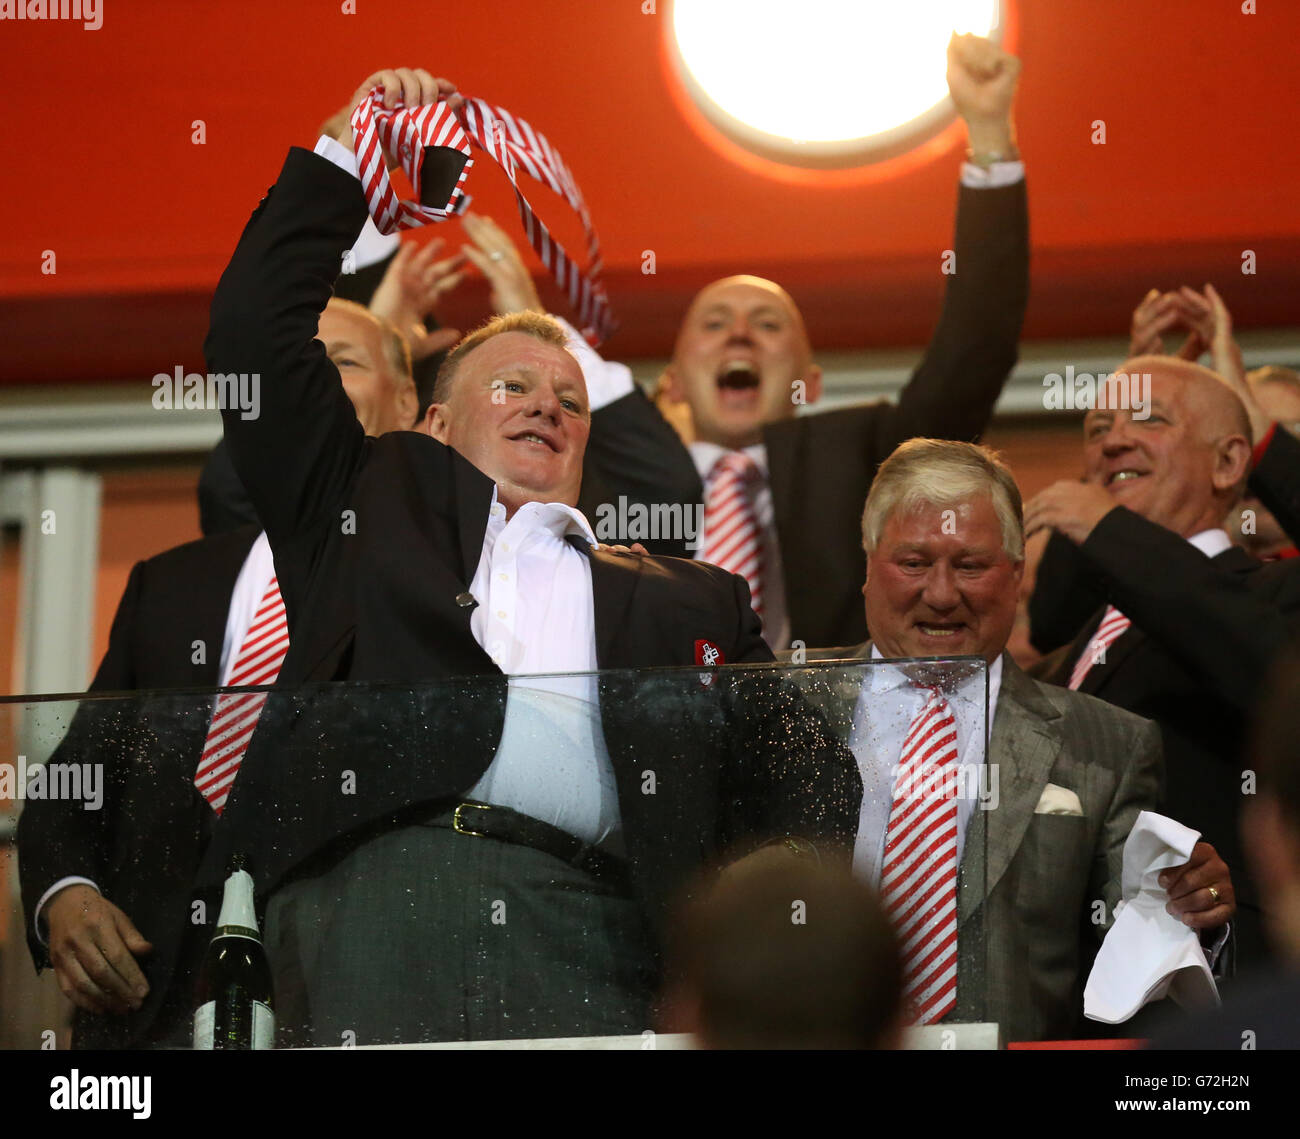 Rotherham's manager Steve Evans celebrates in the stand at the end of the game Stock Photo